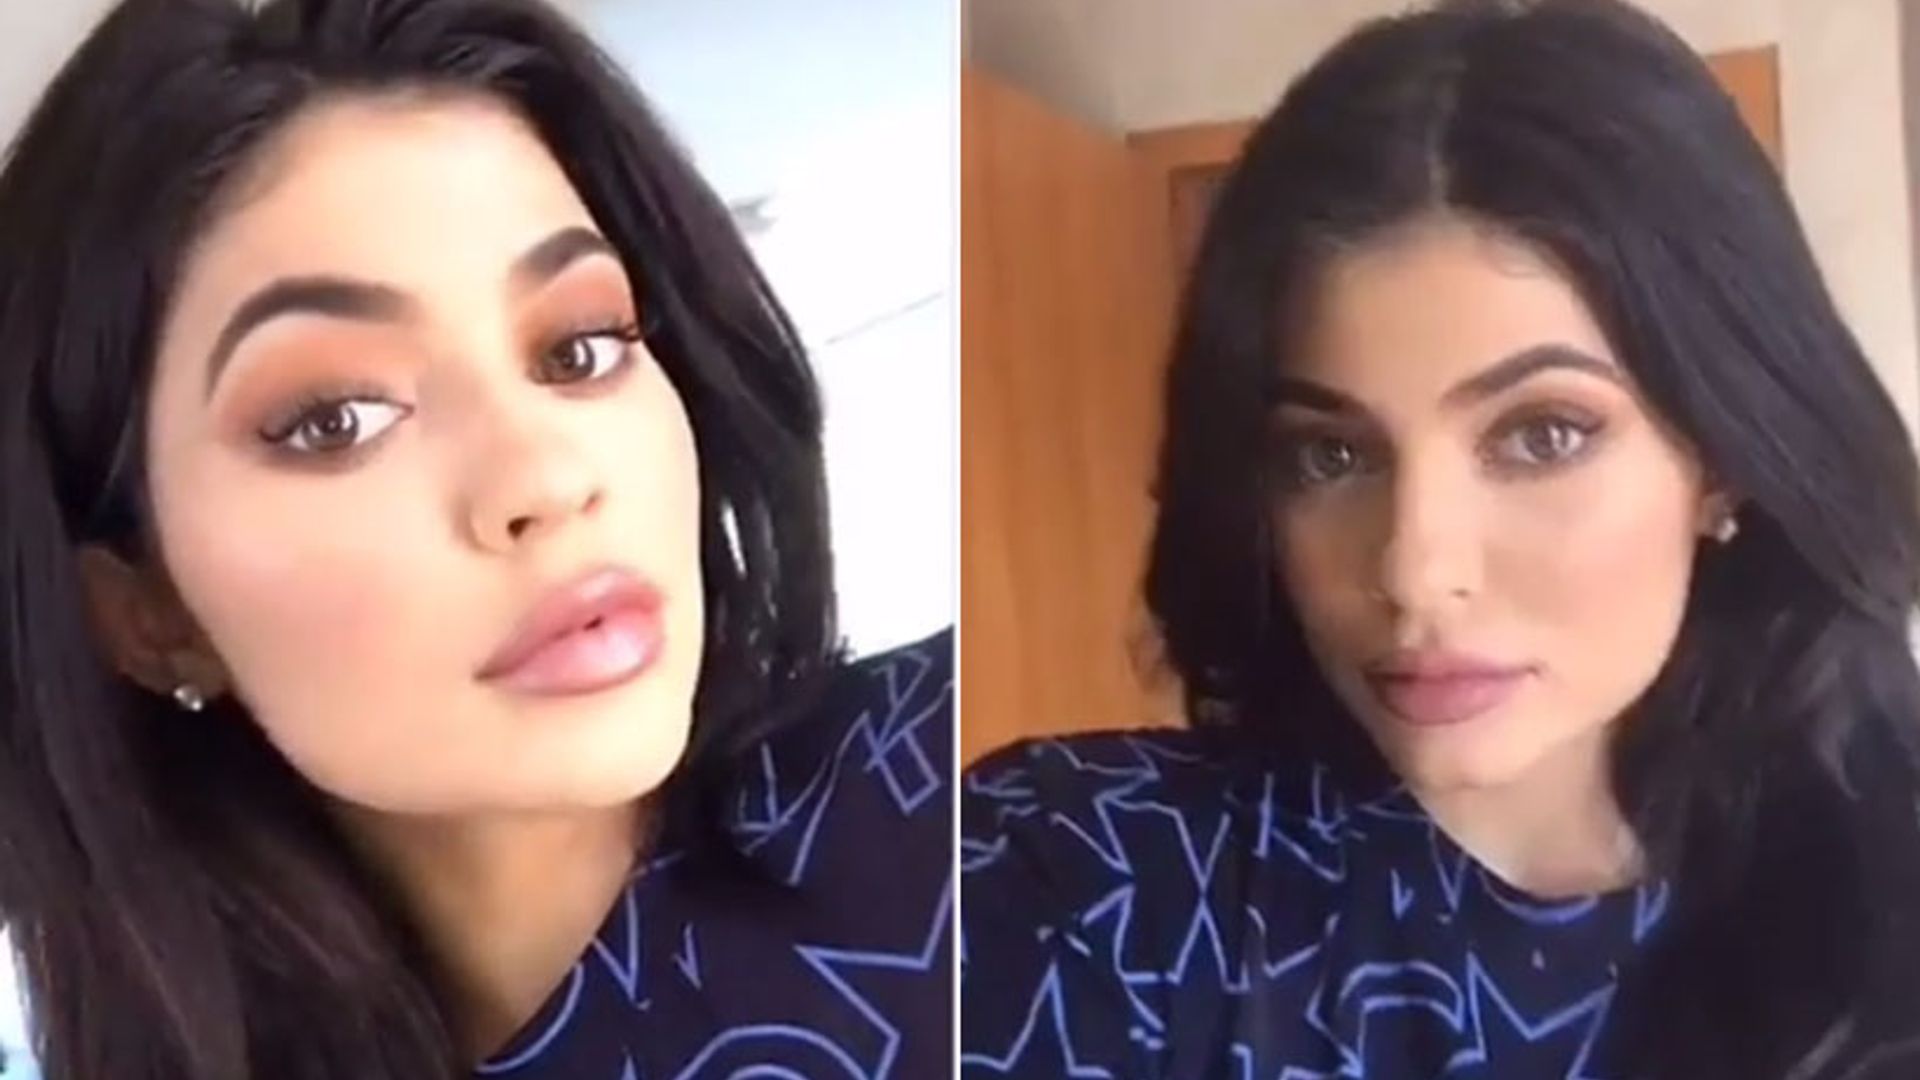 Kylie Jenner shares step-by-step make-up tutorial for recreating her look